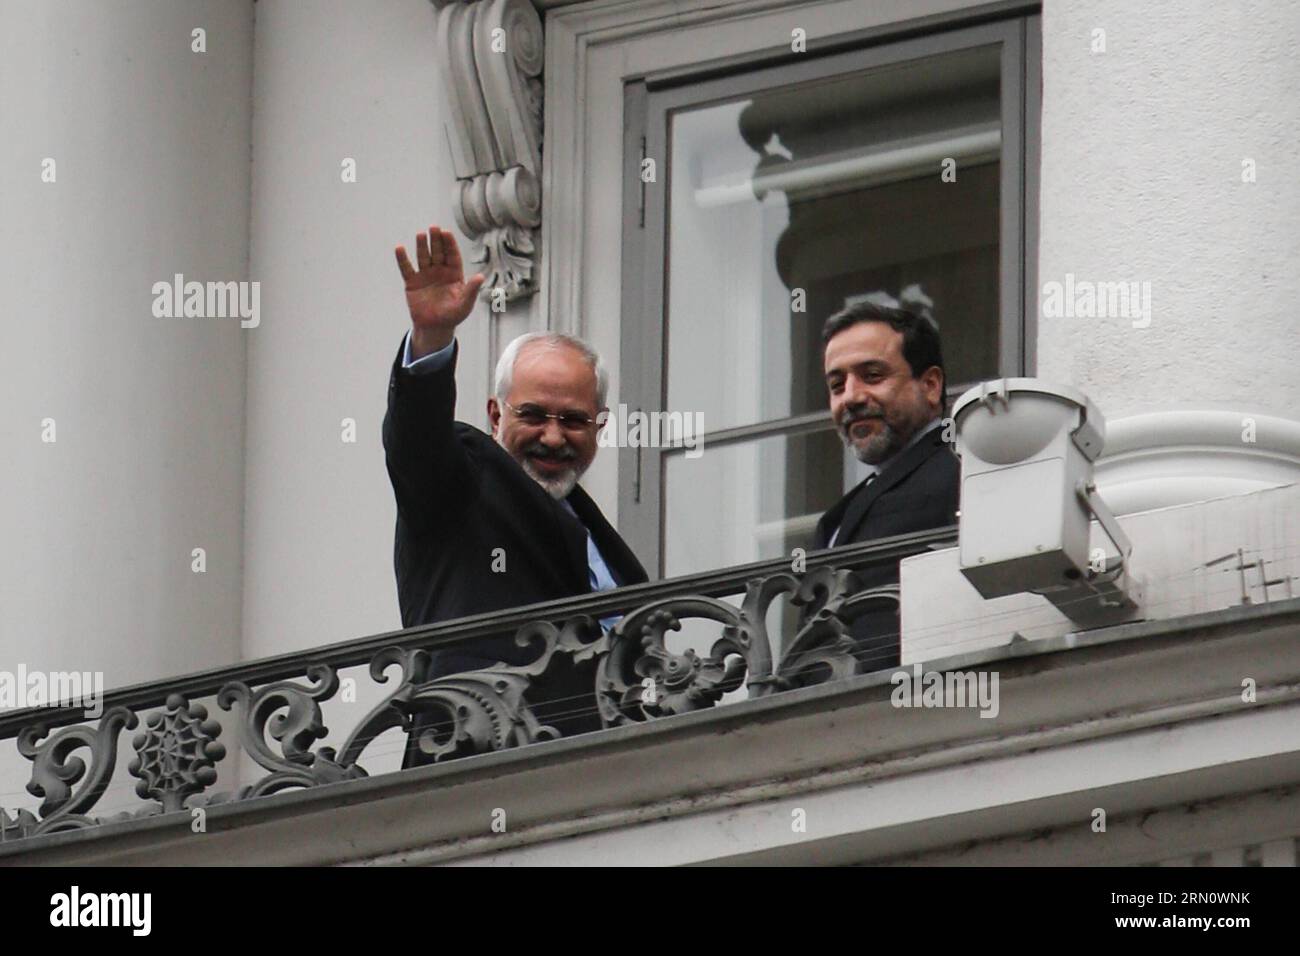 POLITIK Irans Außenminister bei den Atomgesprächen in Wien (141122) -- VIENNA, Nov. 22, 2014 -- Iranian Foreign Minister Mohammad Javad Zarif (L) waves from a balcony of Palais Coburg, the venue of nuclear talks in Vienna, Austria, Nov. 22, 2014. The world s major powers and Iran are racing against time to reach a deal over Tehran s nuclear program. As for the Nov. 24 deadline, there are only two days left in the talks between Iran and the P5+1 group. ) AUSTRIA-VIENNA-NUCLEAR TALKS ZhangxFan PUBLICATIONxNOTxINxCHN   politics Iran Foreign Minister at the Nuclear talks in Vienna  Vienna Nov 22 2 Stock Photo